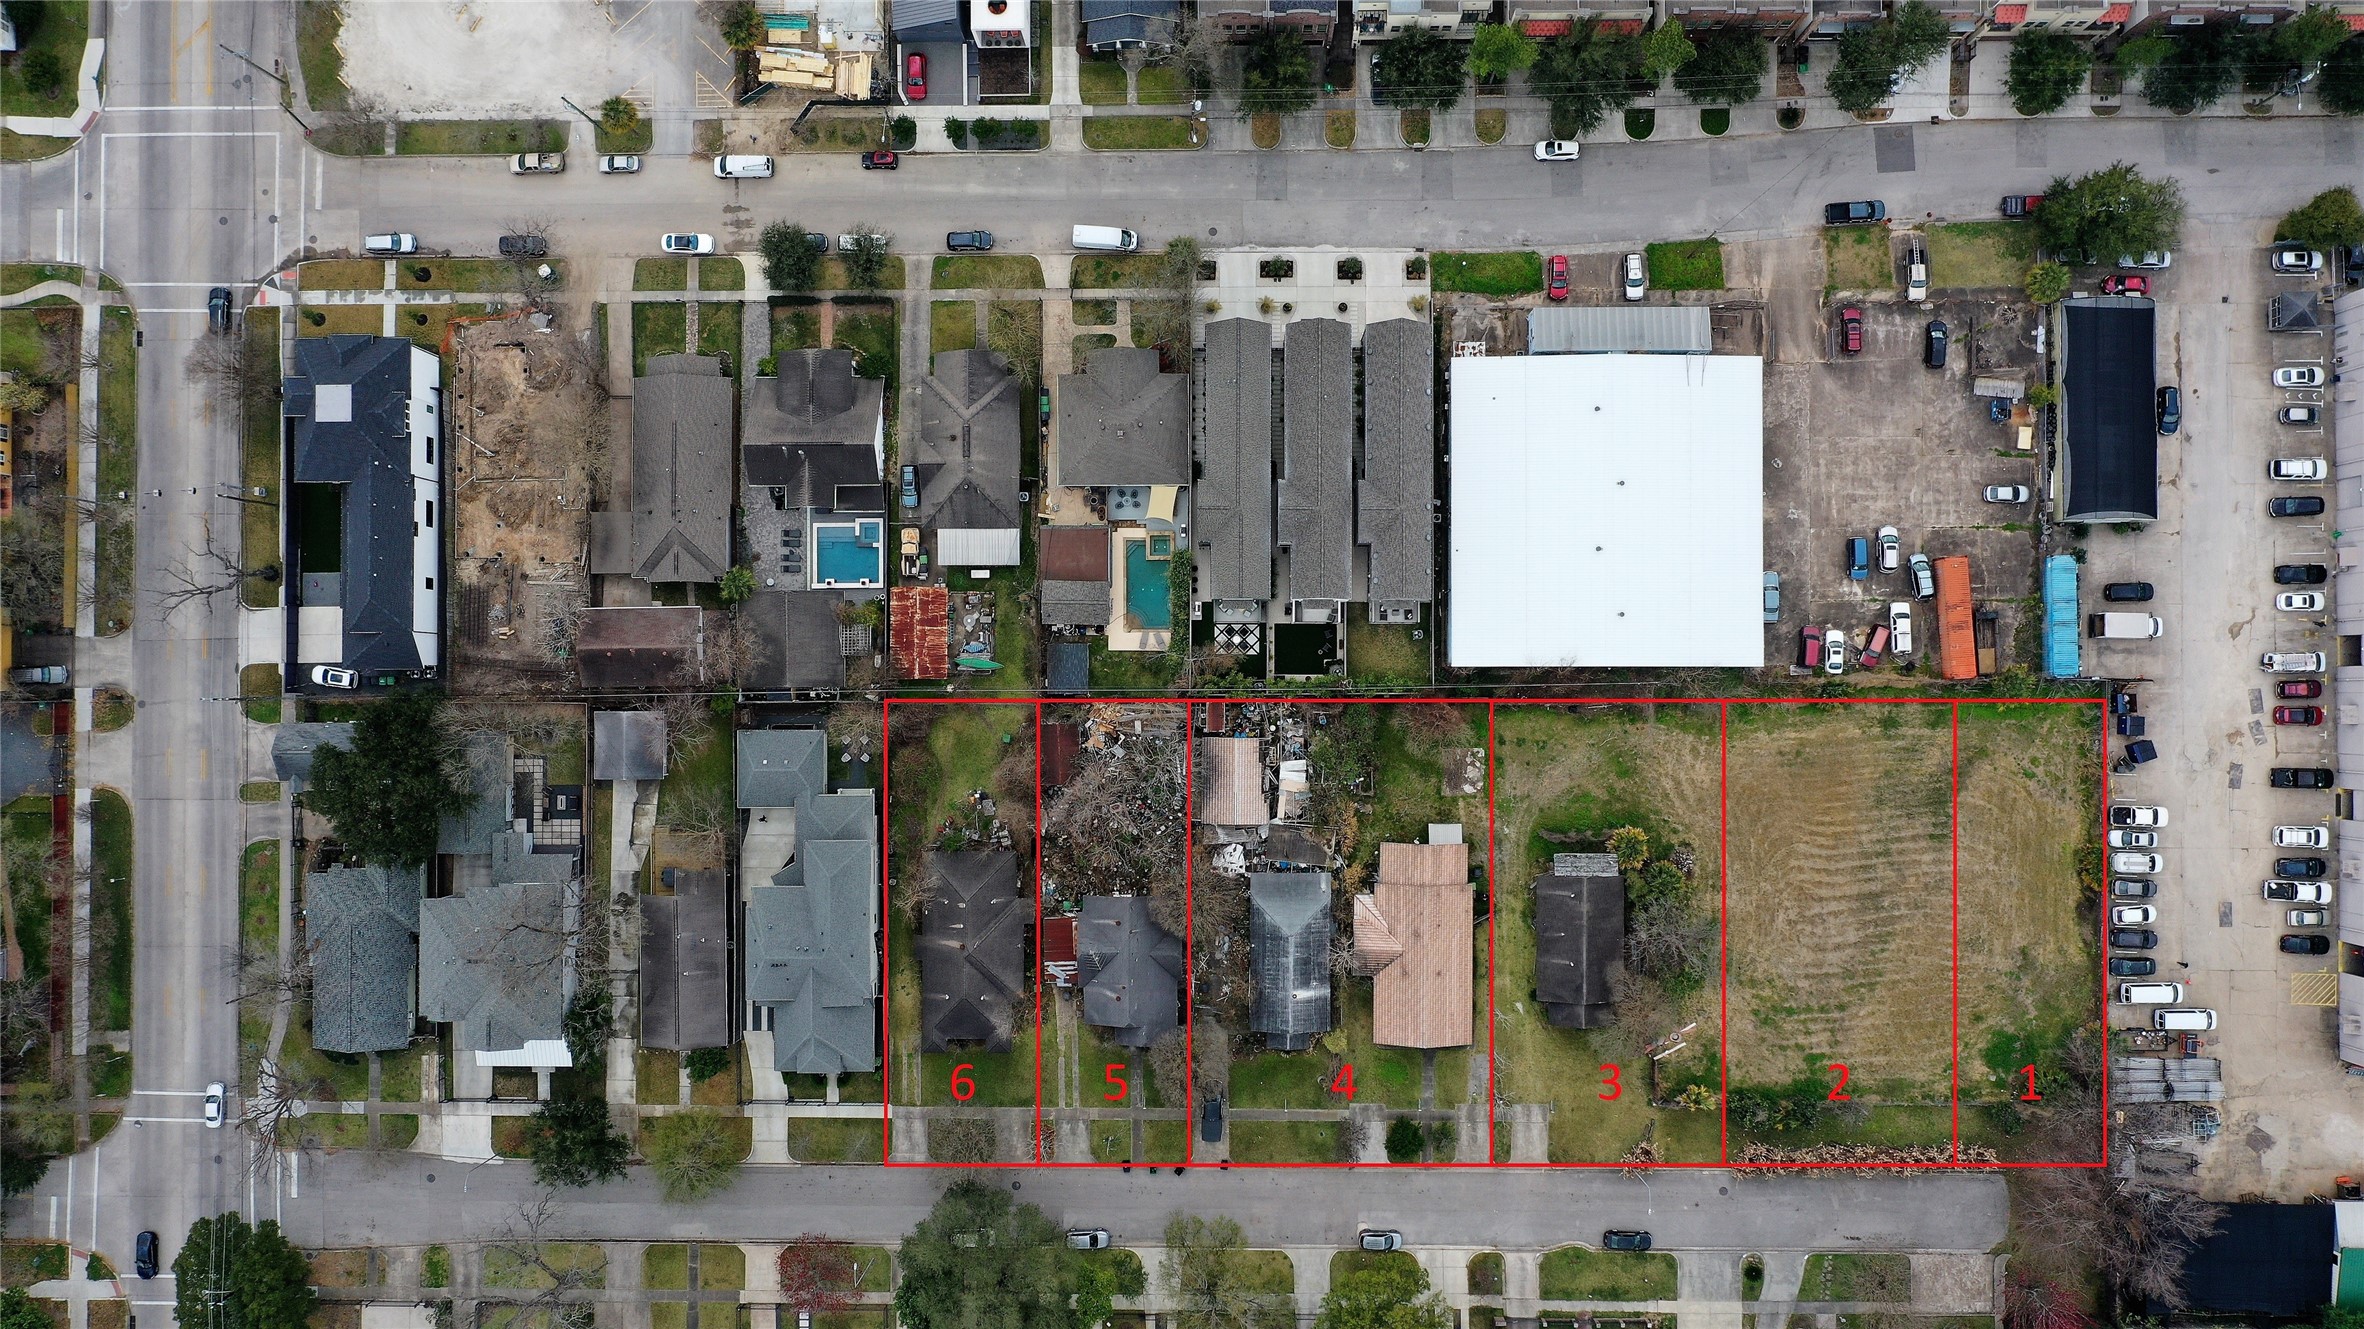 Proposed 6-lot layout of the last 8 parcels on the street!